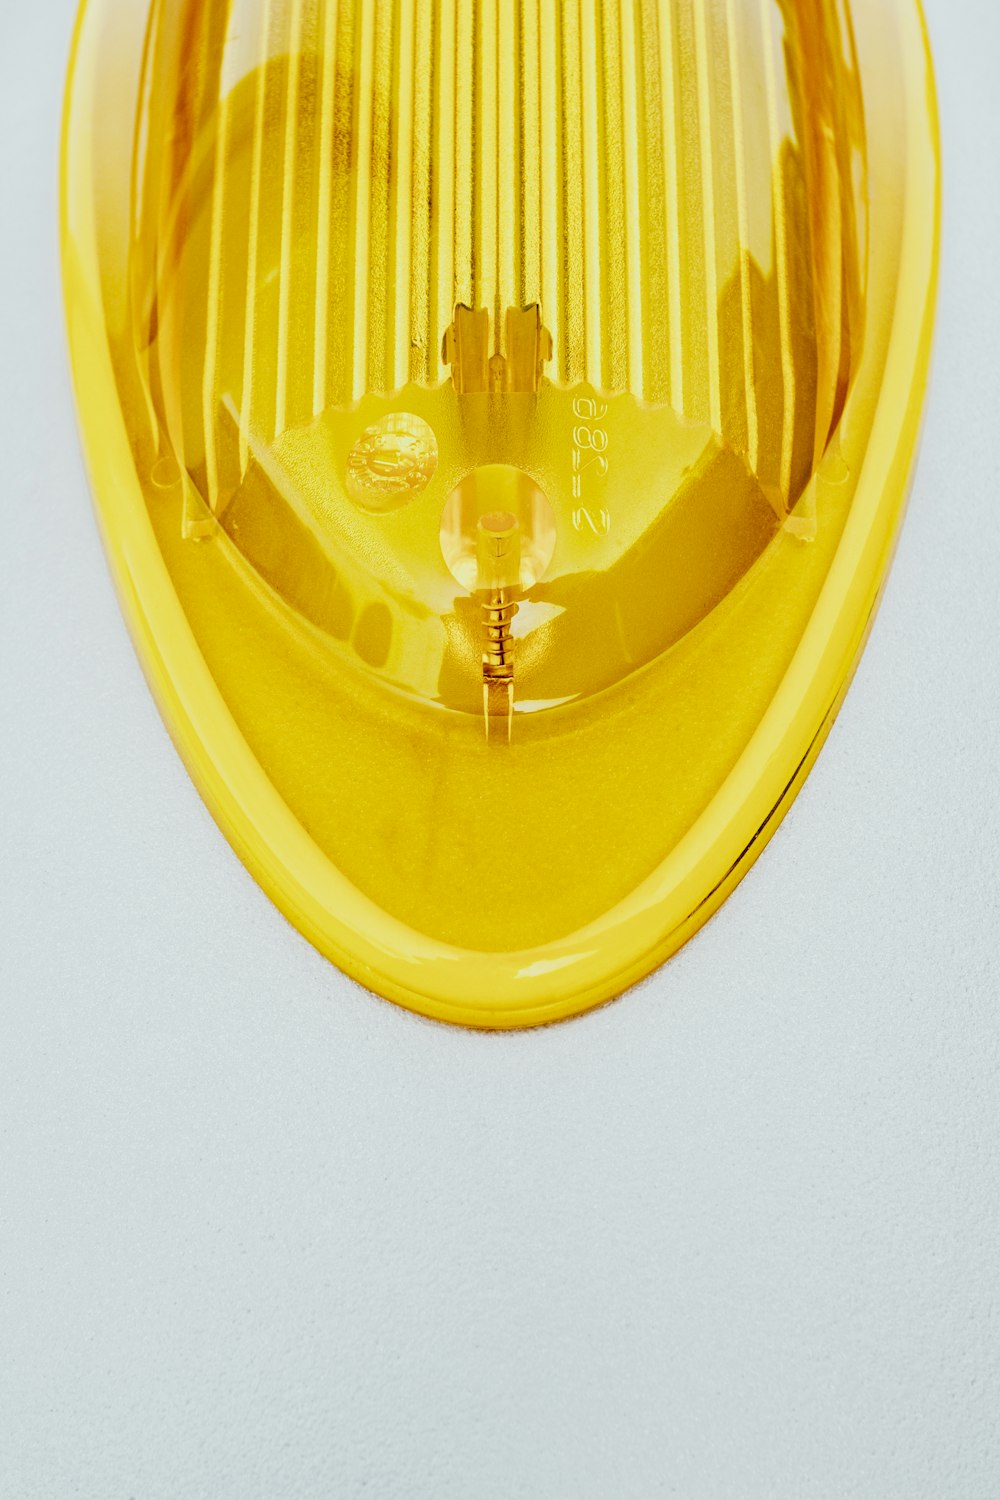 a close up of a yellow light on a white surface